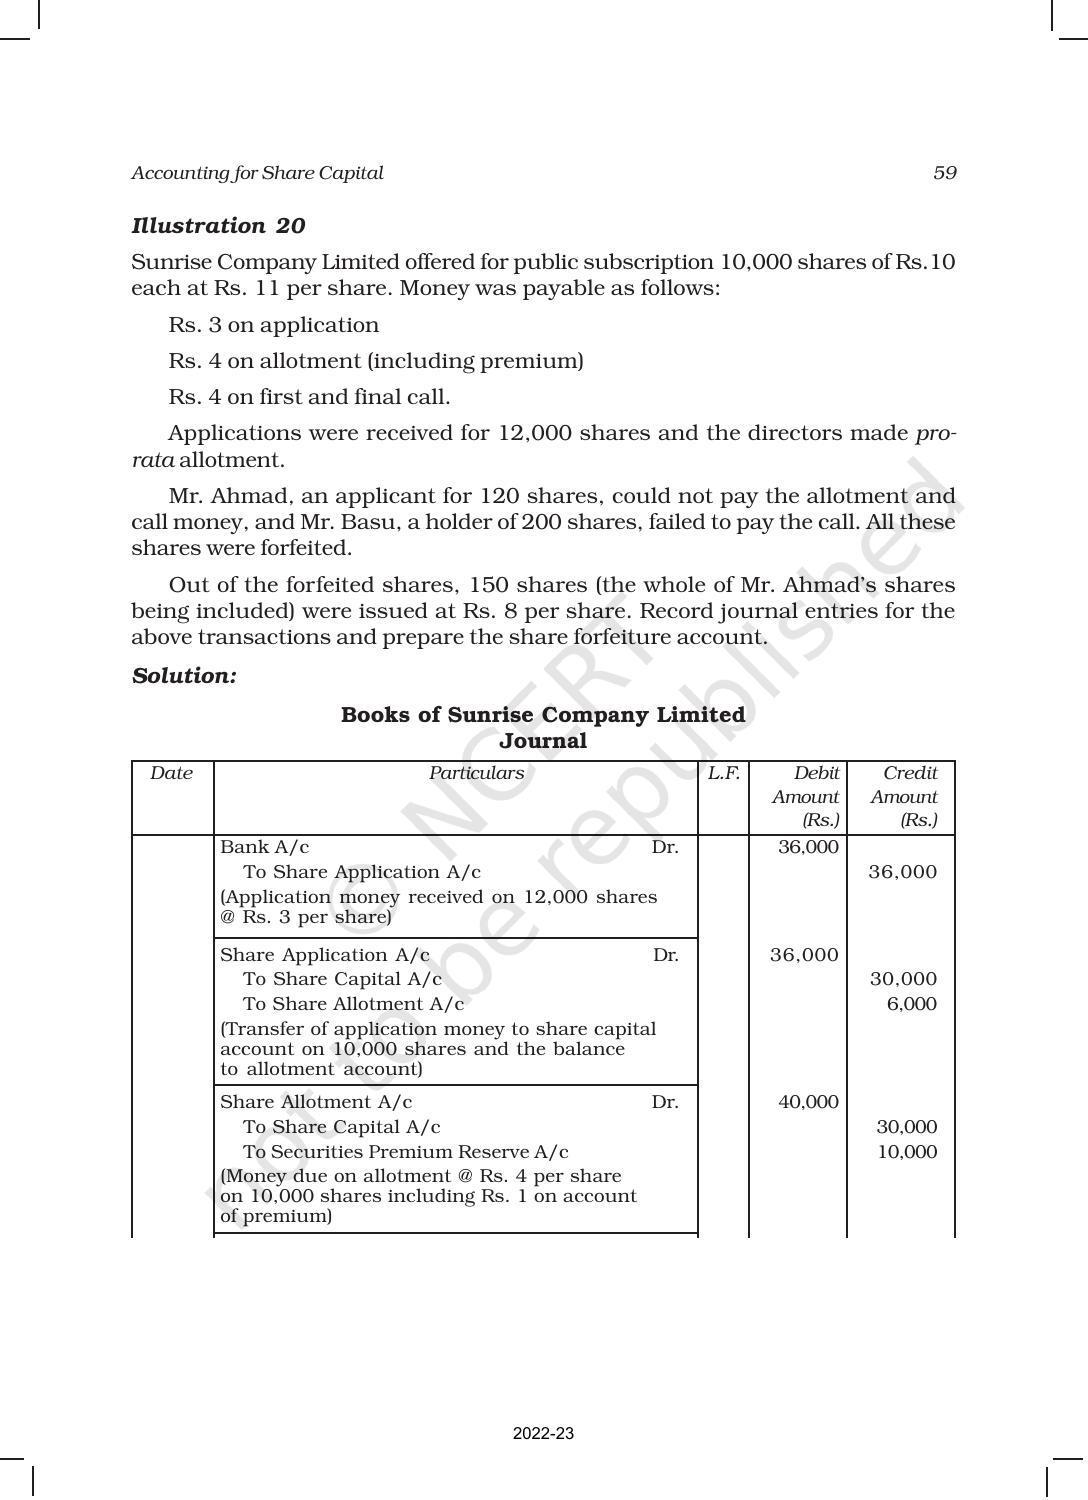 NCERT Book for Class 12 Accountancy Part II Chapter 1 Accounting for Share Capital - Page 59